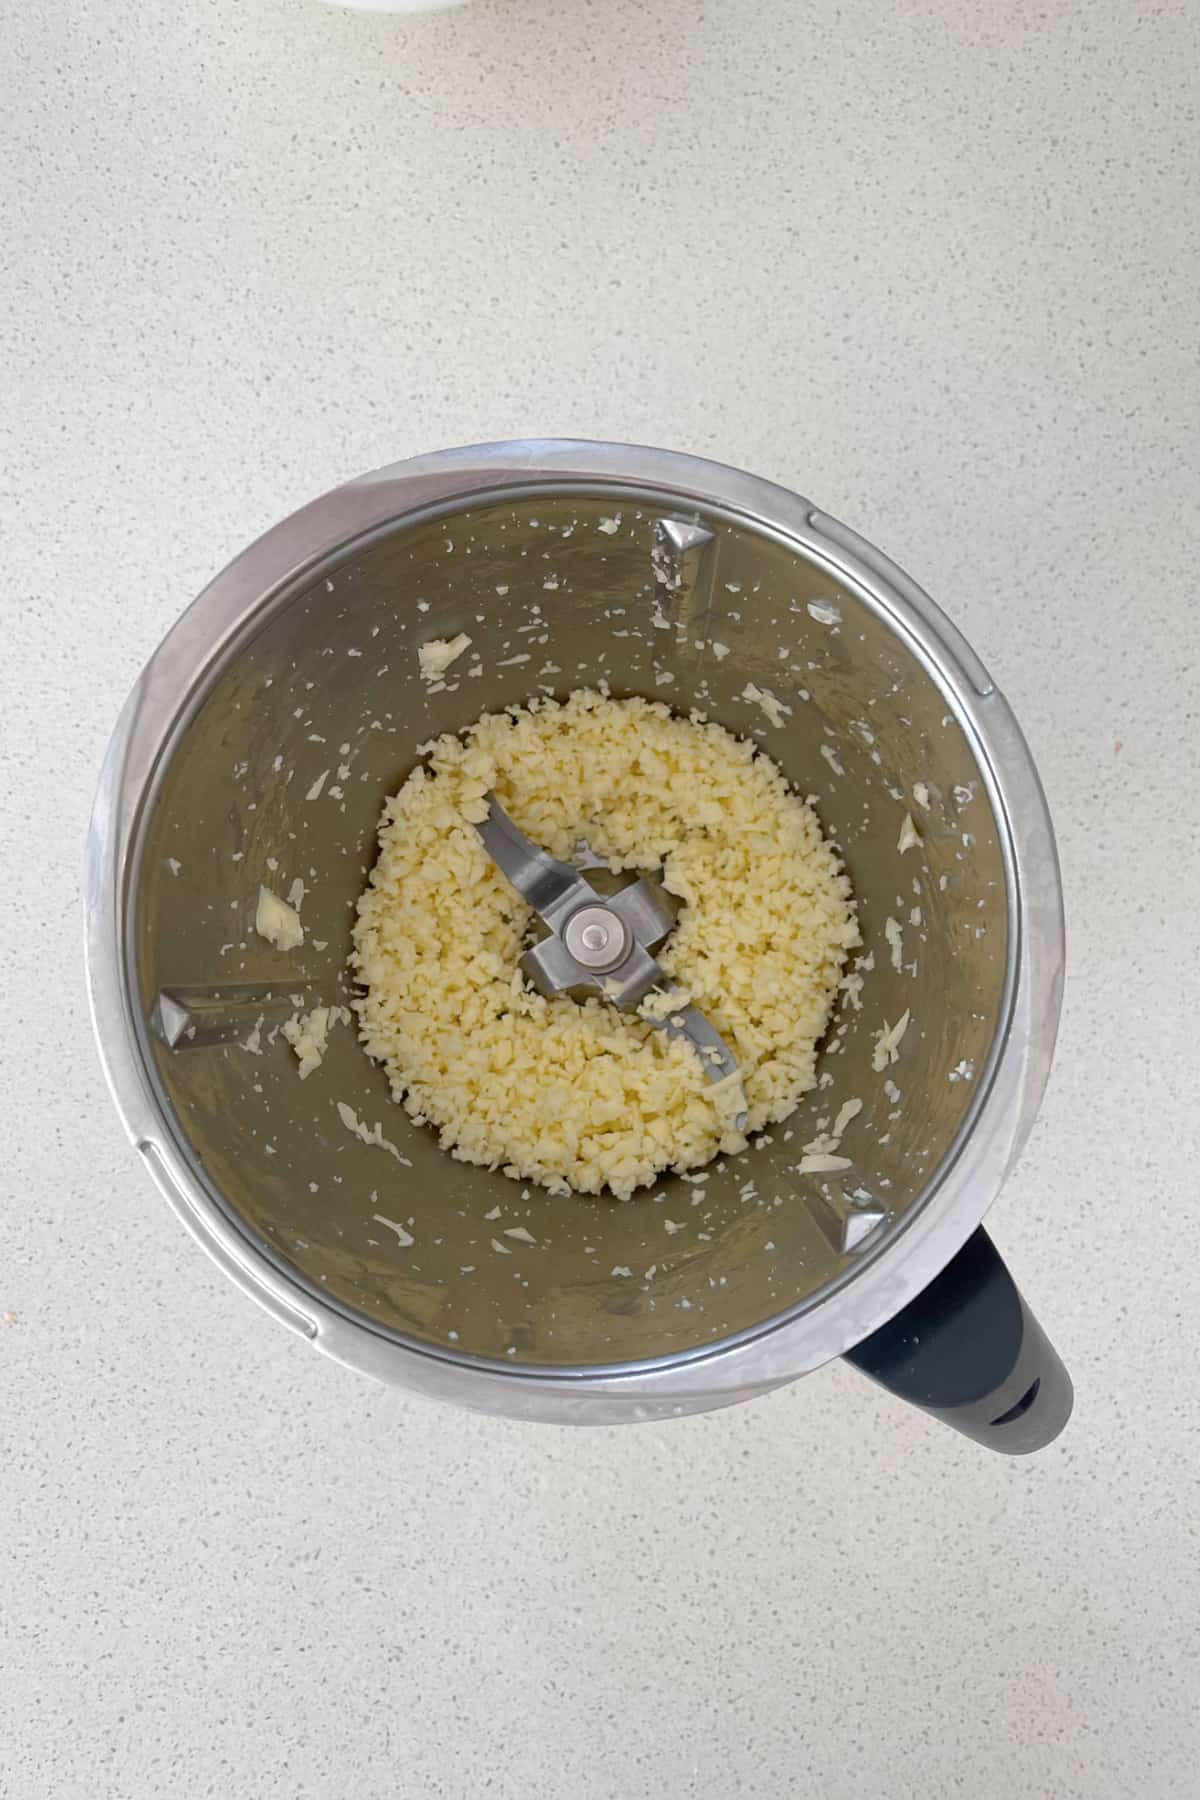 Grated cheese in a Thermomix bowl.